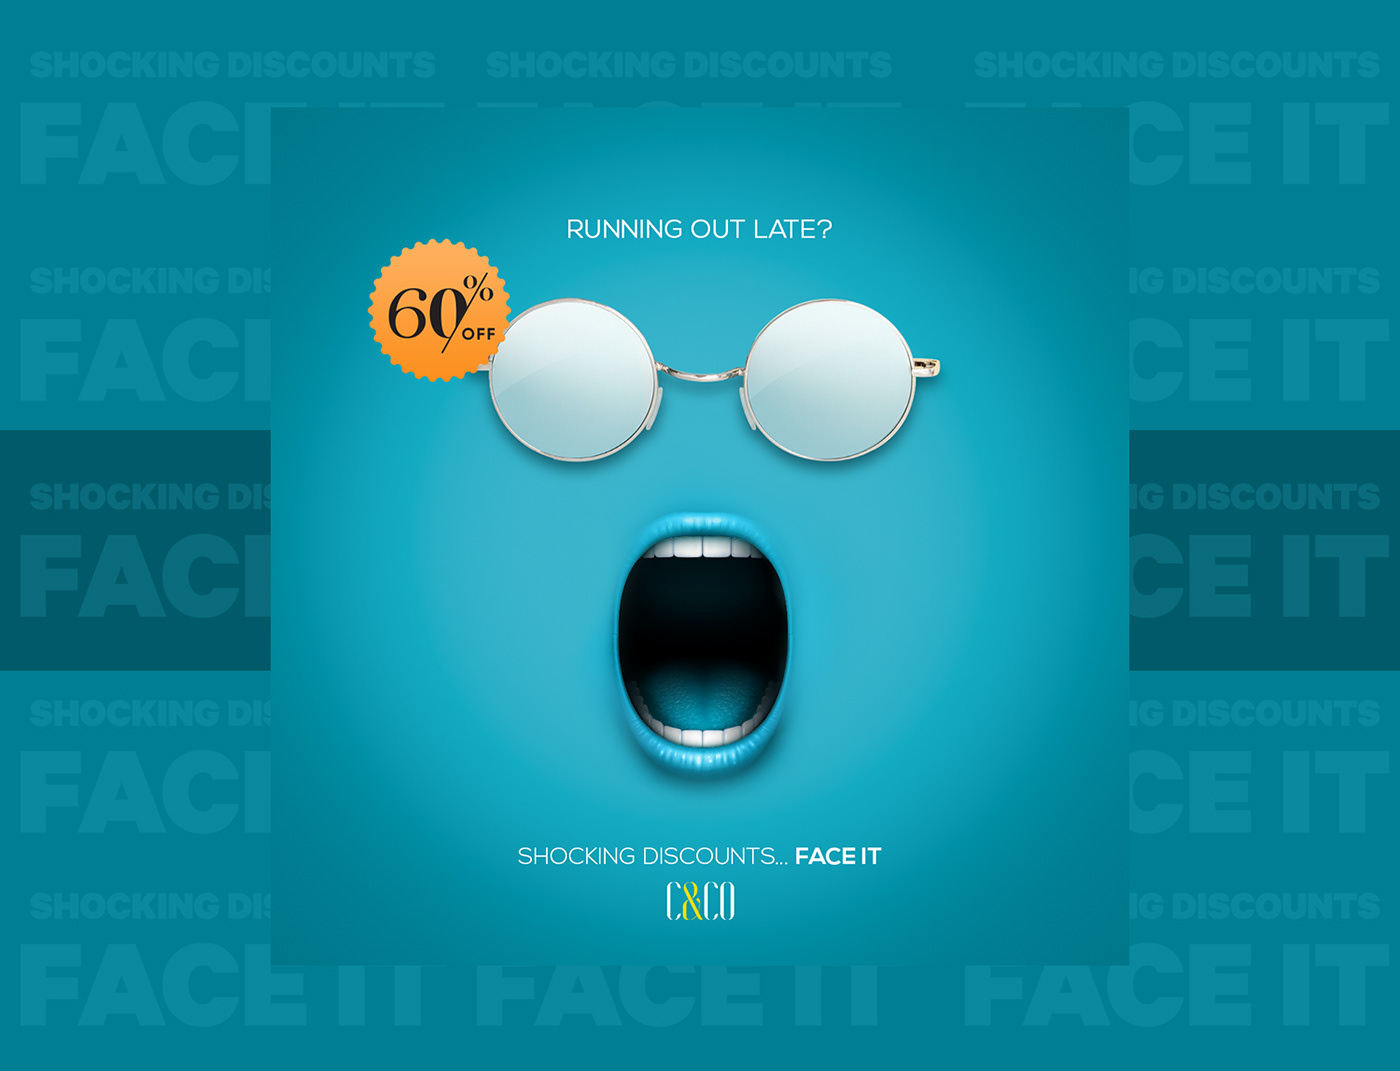 Advertising  ILLUSTRATION  Black Friday C&CO creative shocking discounts face it glasses Mouth social media